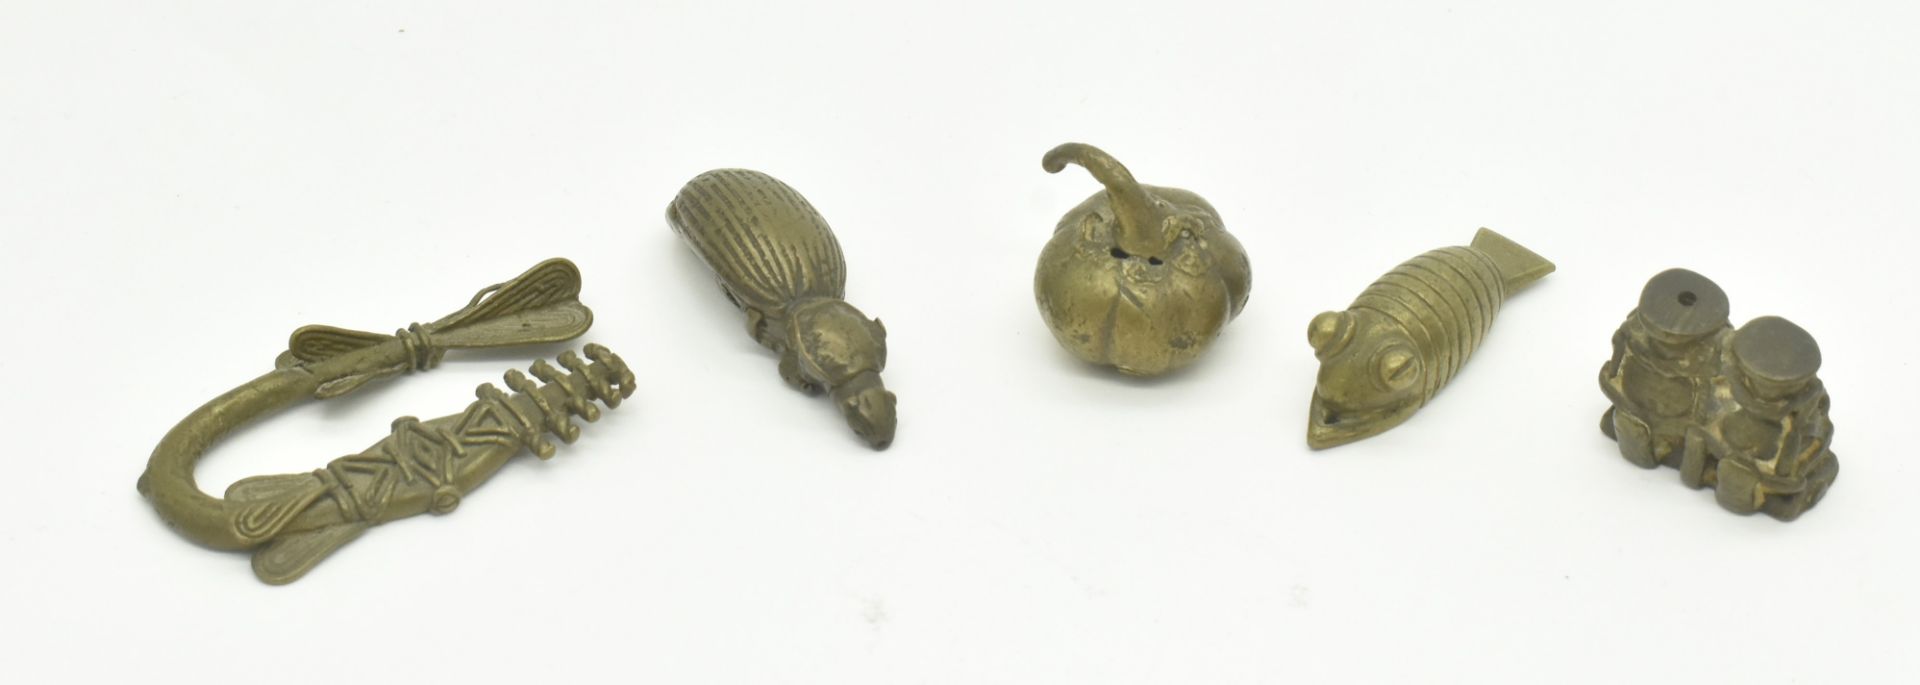 COLLECTION OF FIVE AFRICAN GHANA ASHANTI AKAN GOLD WEIGHTS